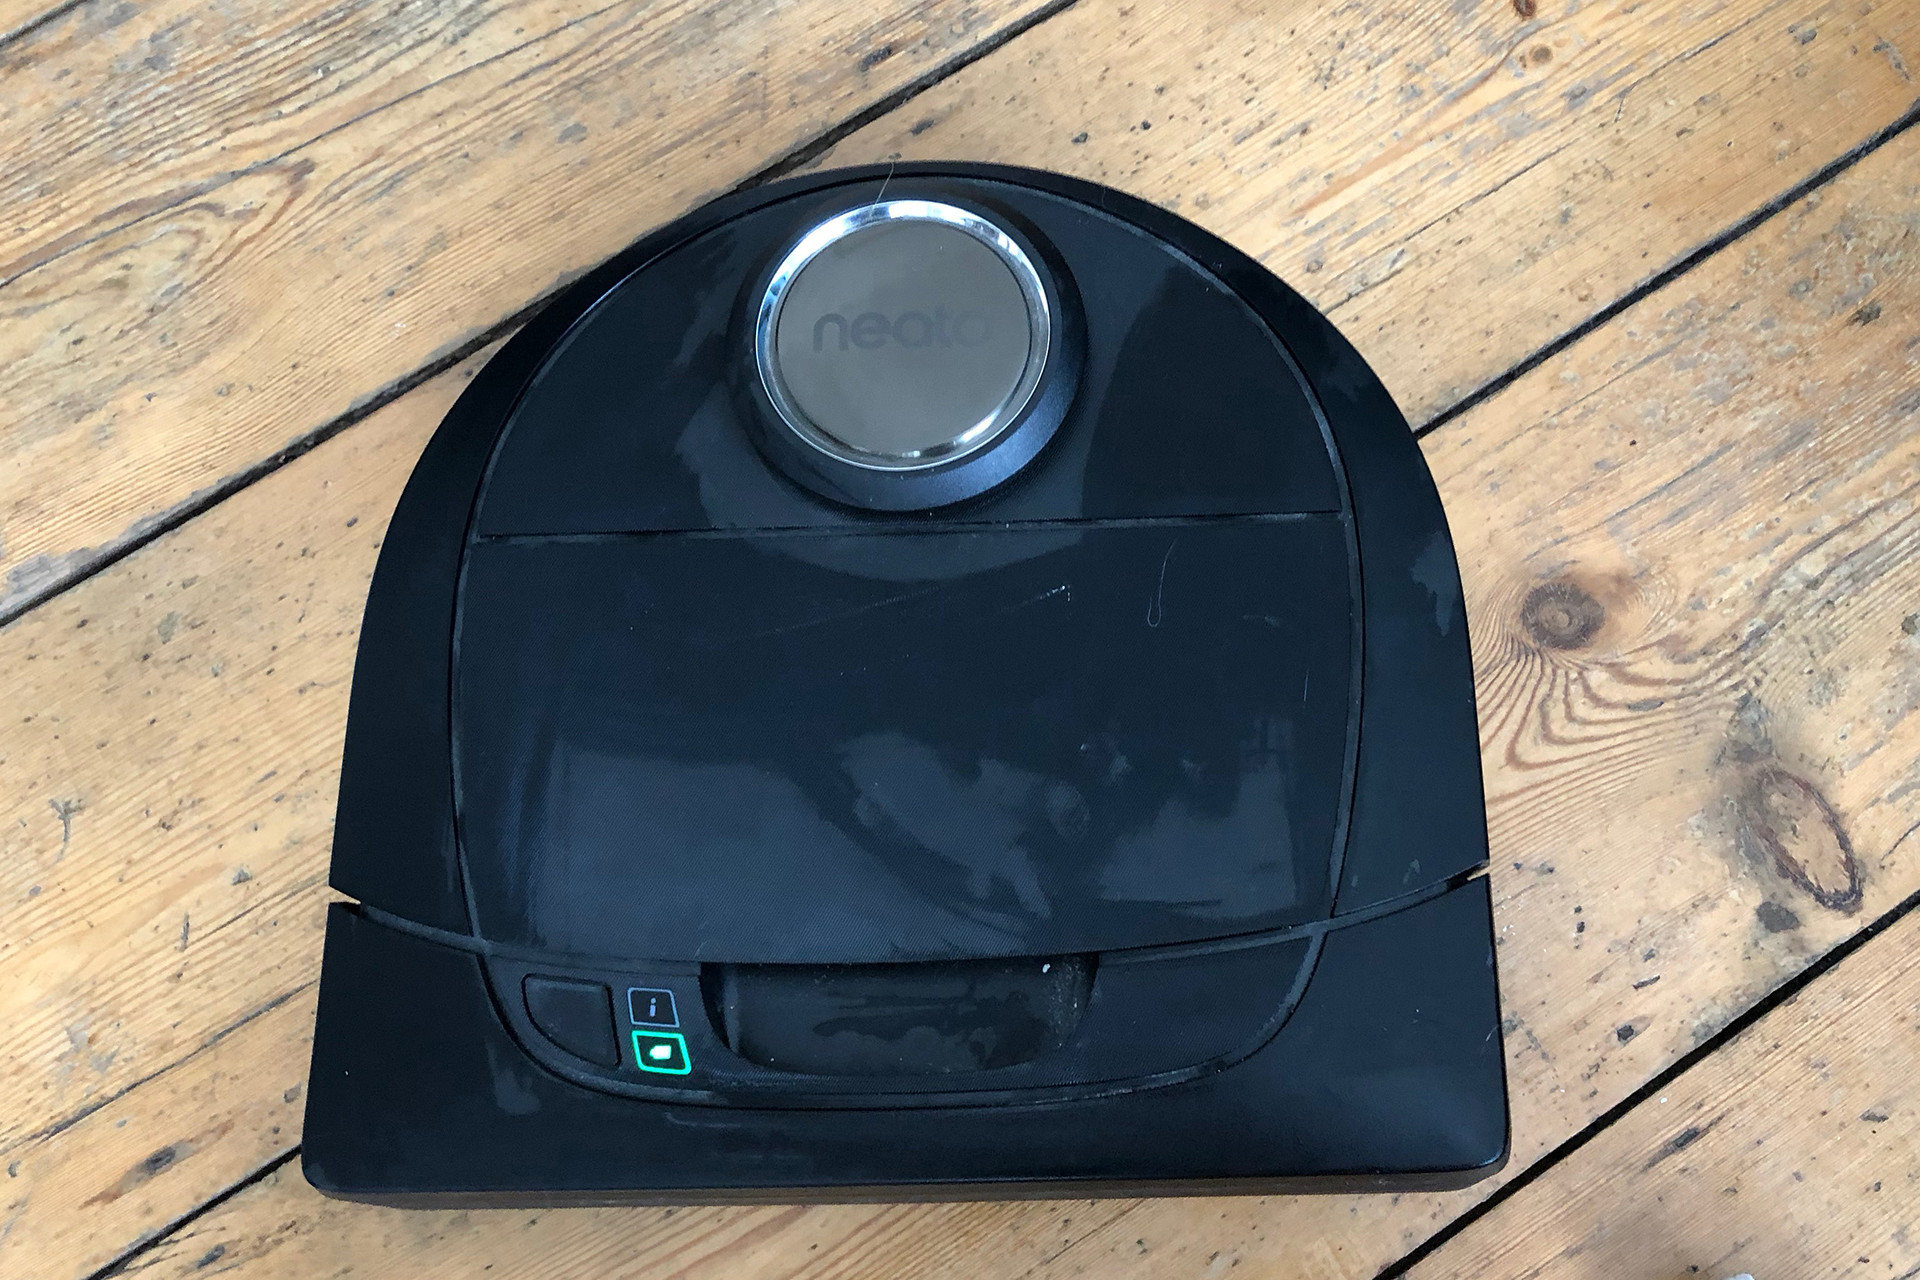 22 Fashionable Best Robot Vacuum for Pet Hair On Hardwood Floors 2023 free download best robot vacuum for pet hair on hardwood floors of neato botvac d5 connected review trusted reviews in neato botvac d5 connected from above